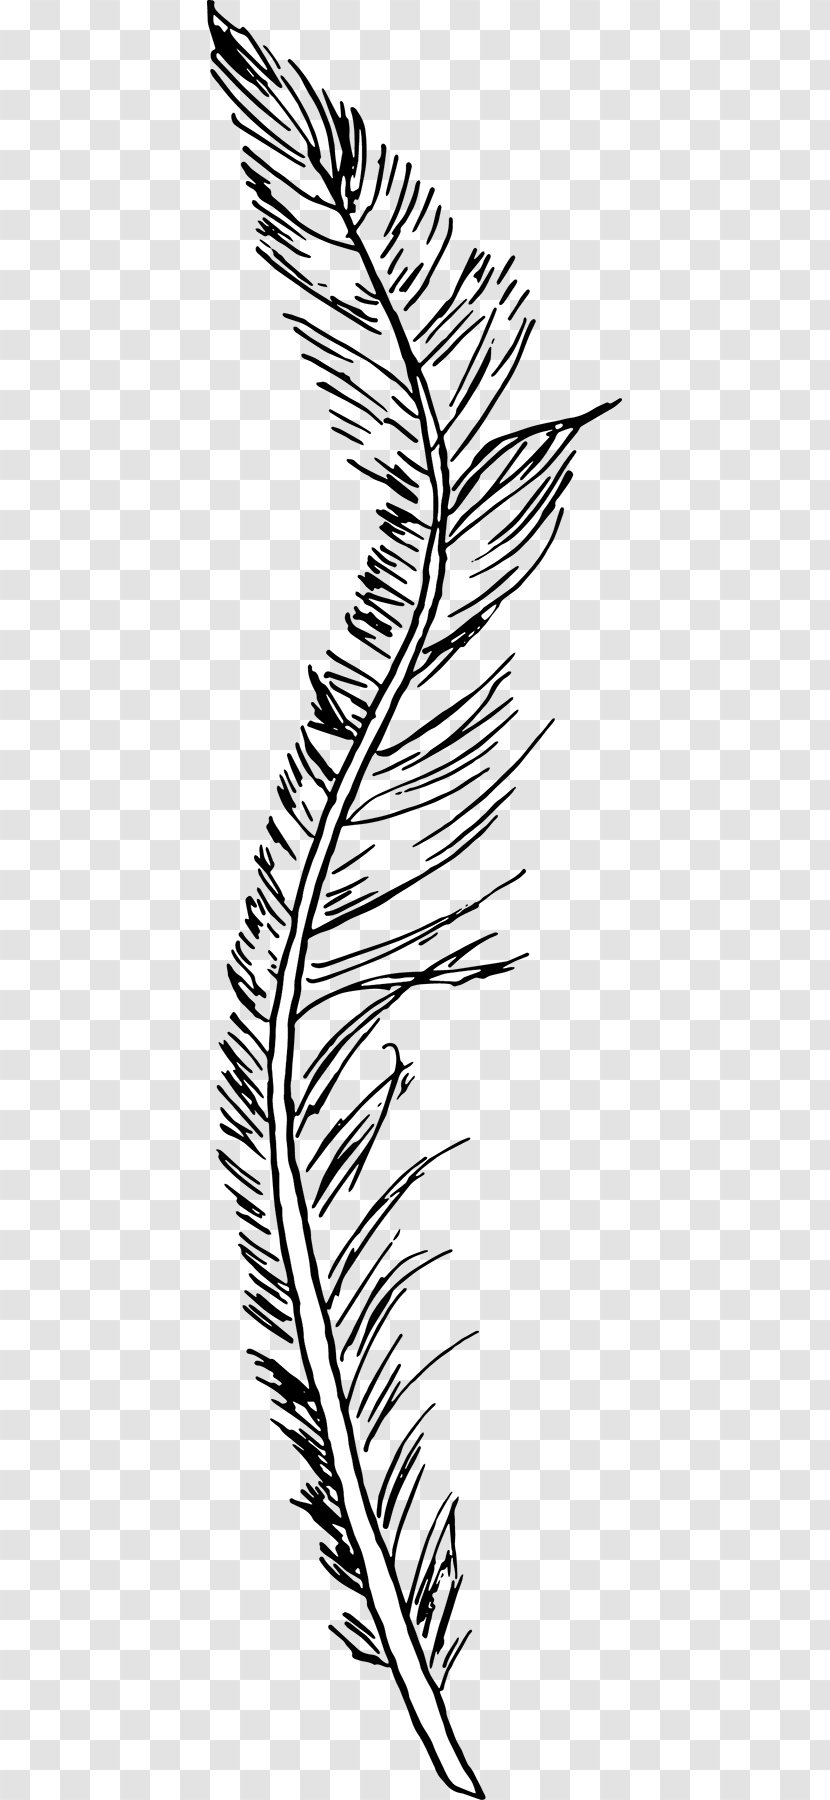 Line Art Leaf White Feather - Plant - Falling Feathers Transparent PNG